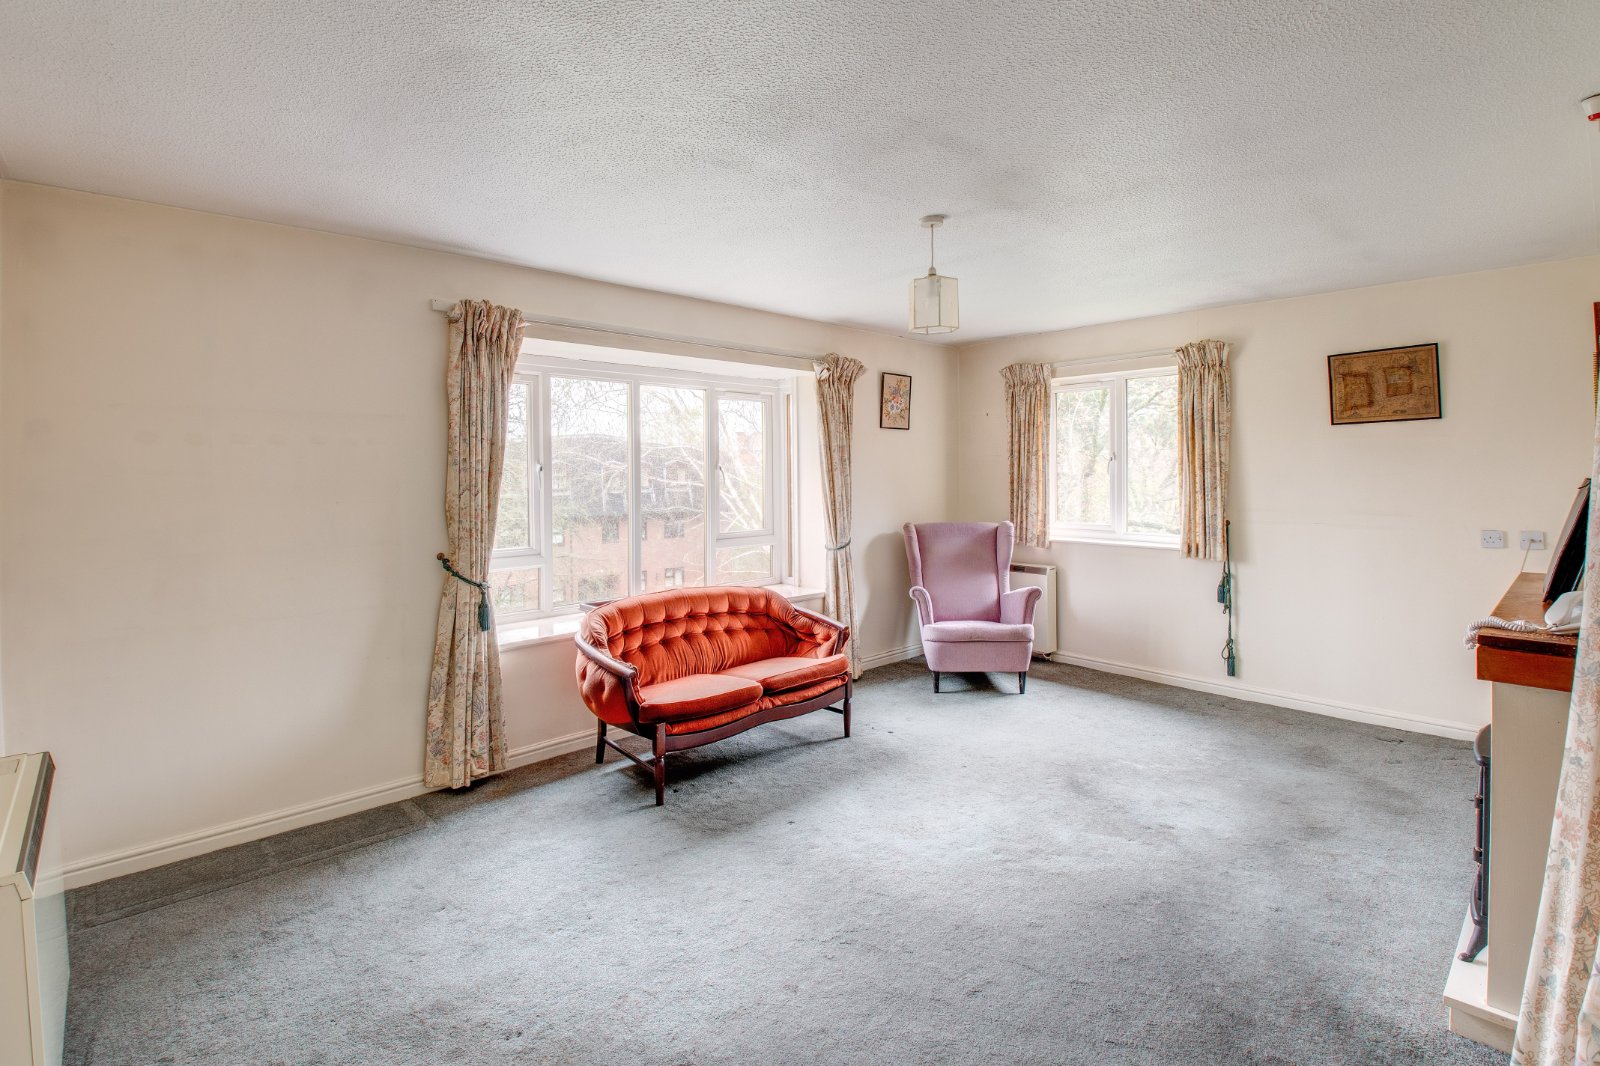 1 bed  for sale in Housman Park, Bromsgrove  - Property Image 6